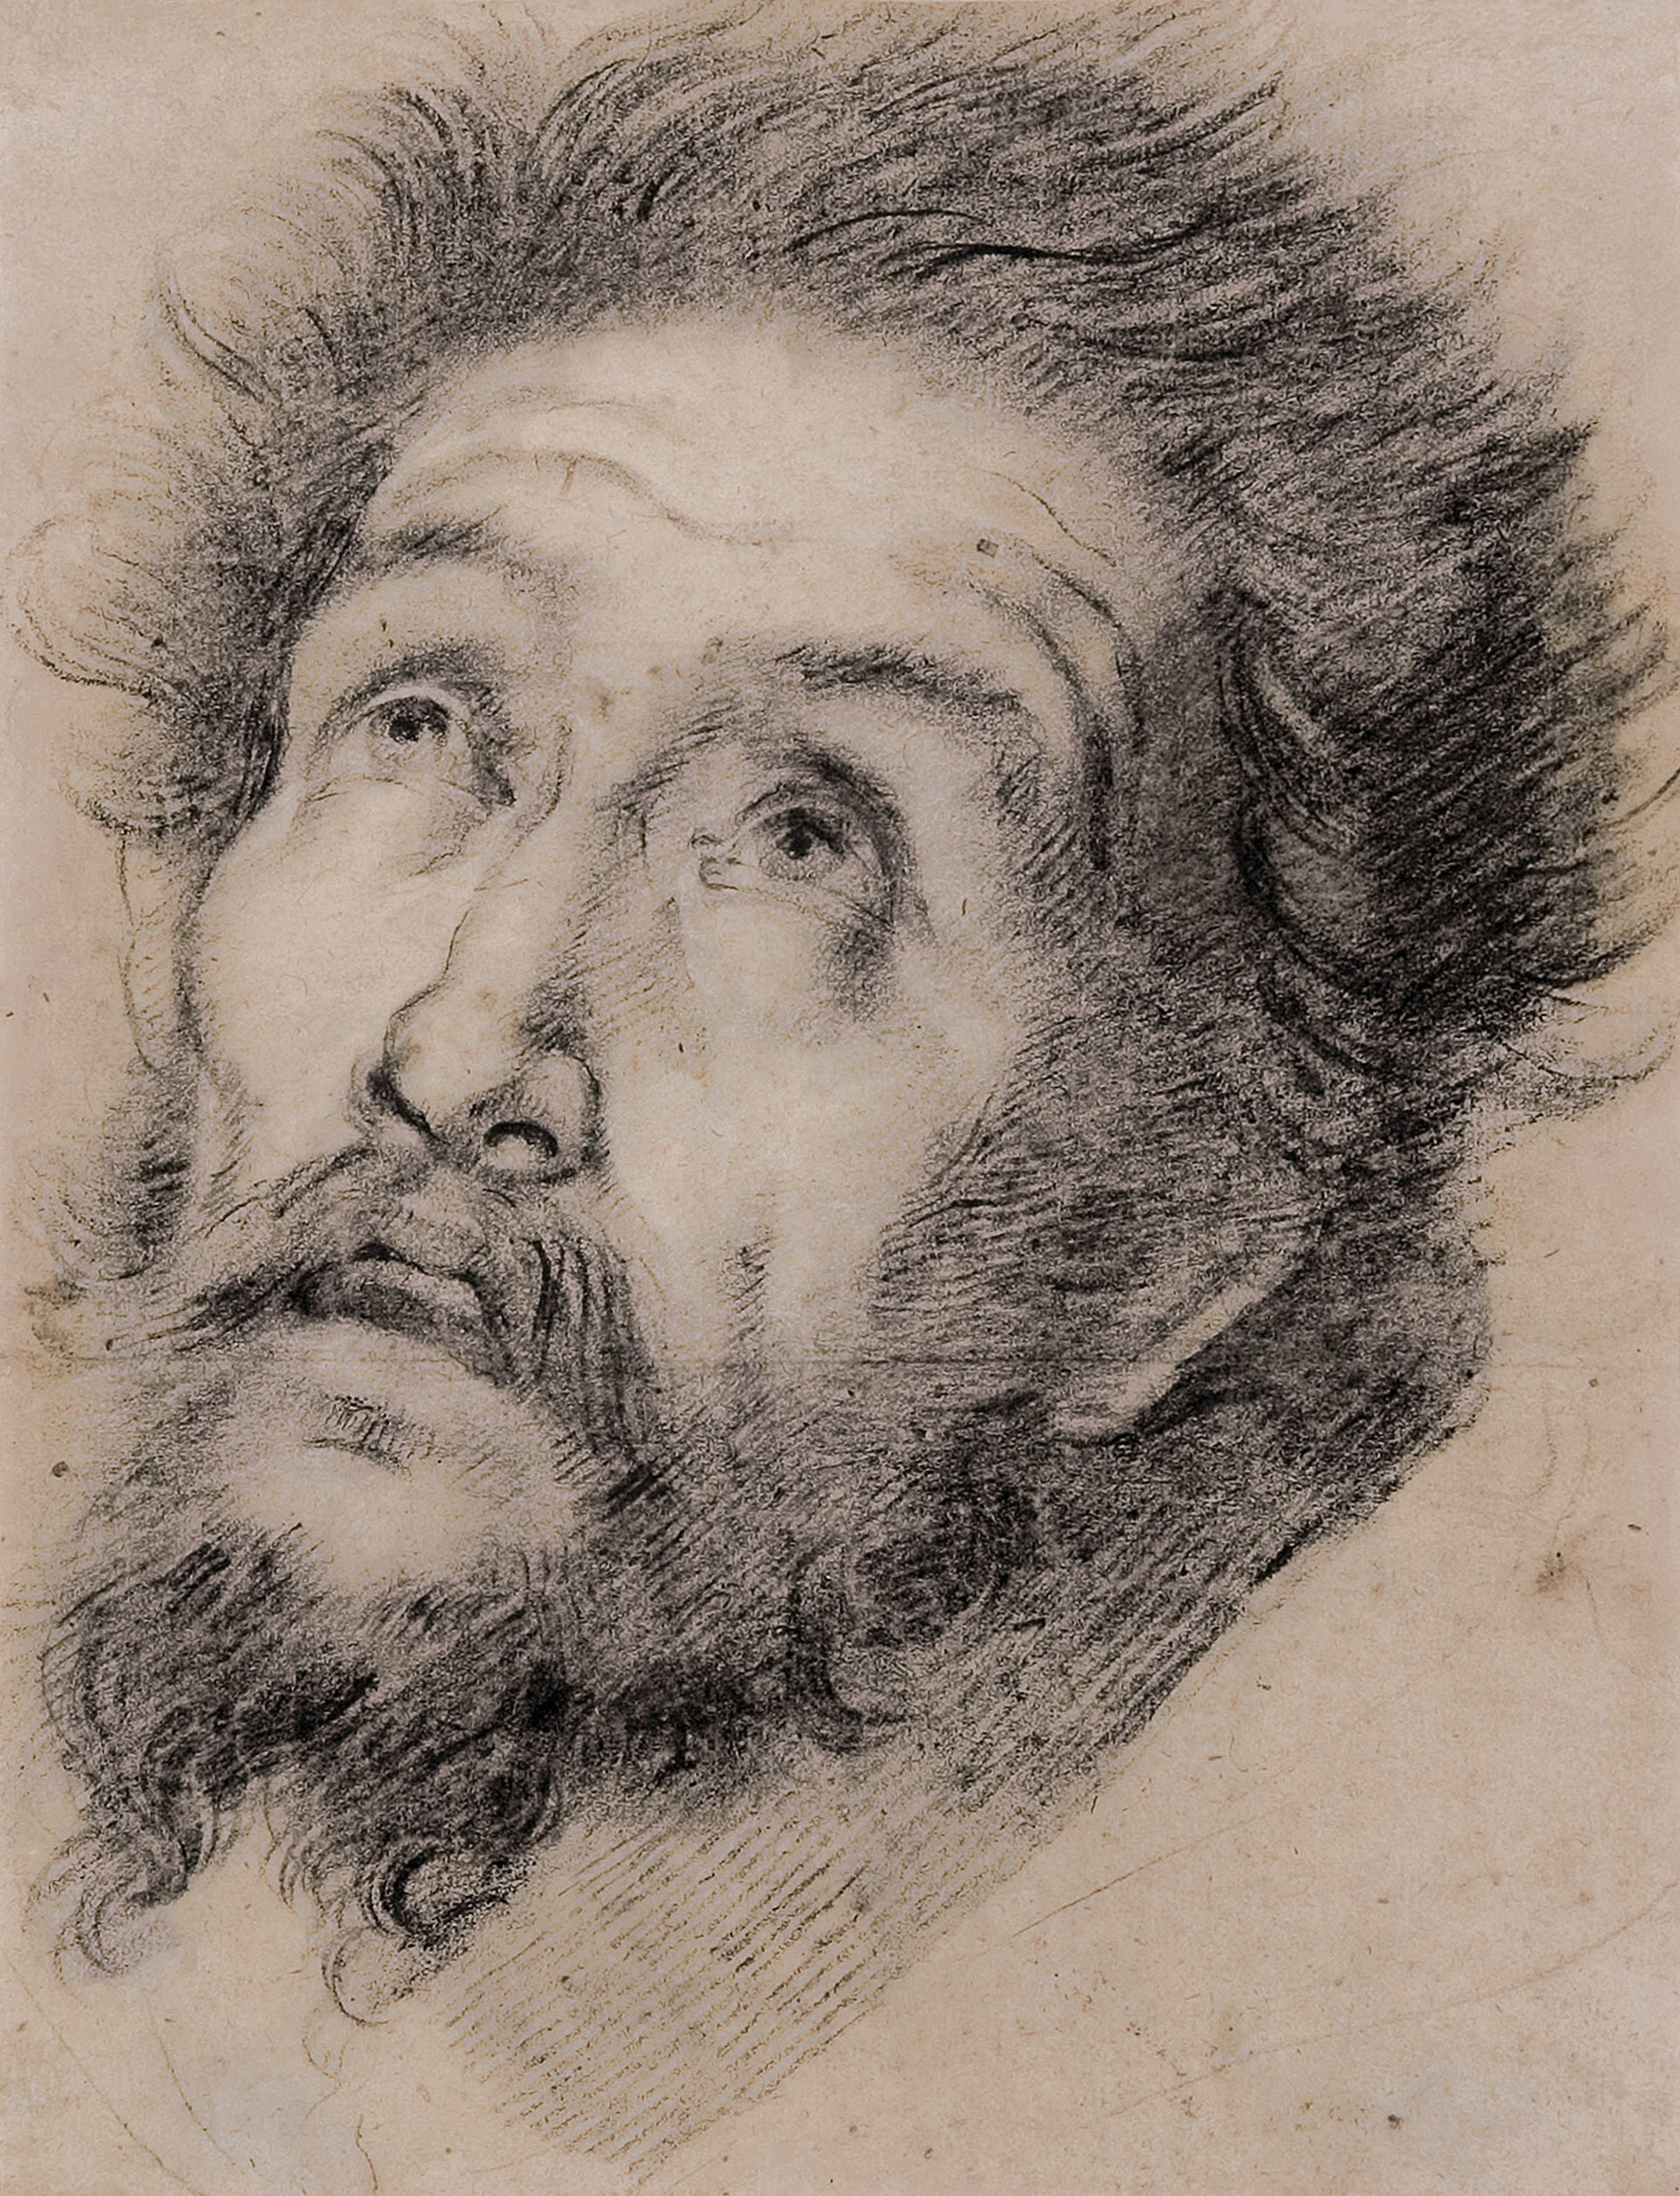 1600–1900 — The Practice of Drawing